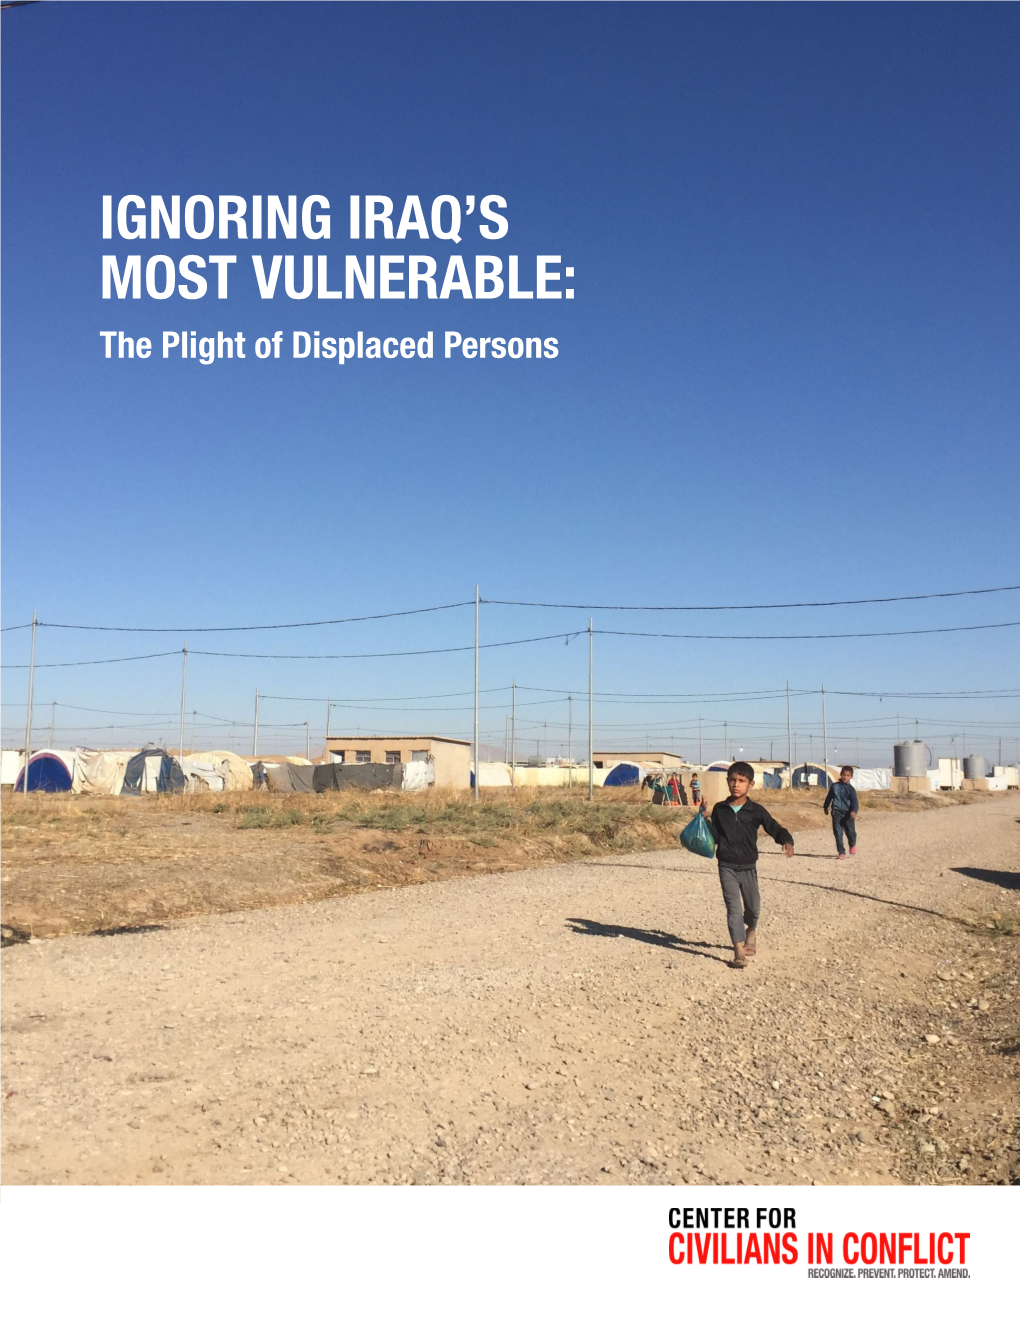 Ignoring Iraq's Most Vulnerable: the Plight of Displaced Persons